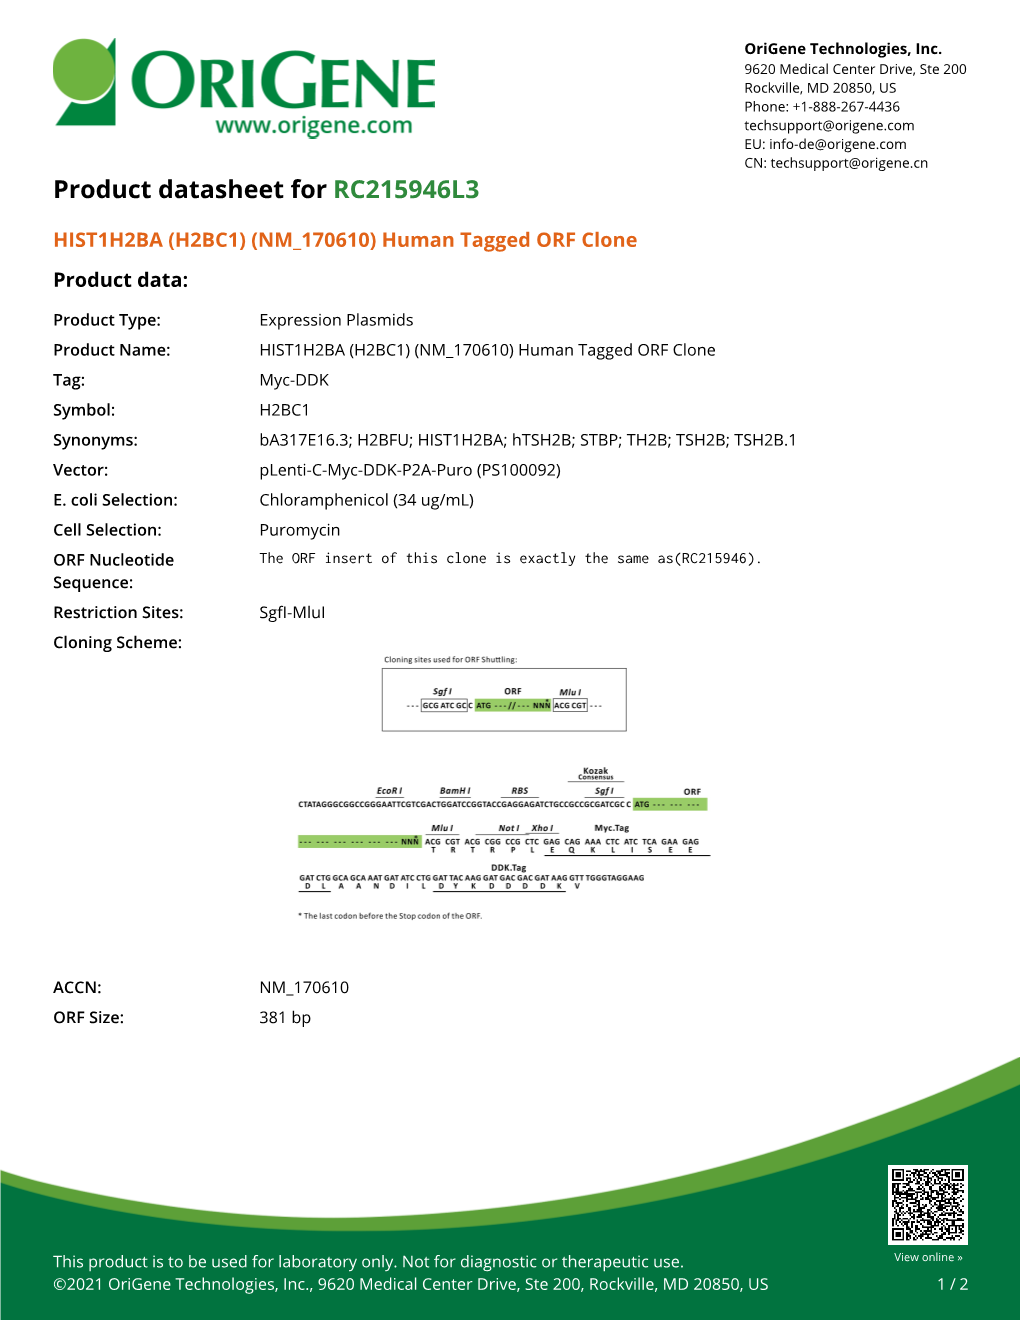 HIST1H2BA (H2BC1) (NM 170610) Human Tagged ORF Clone Product Data